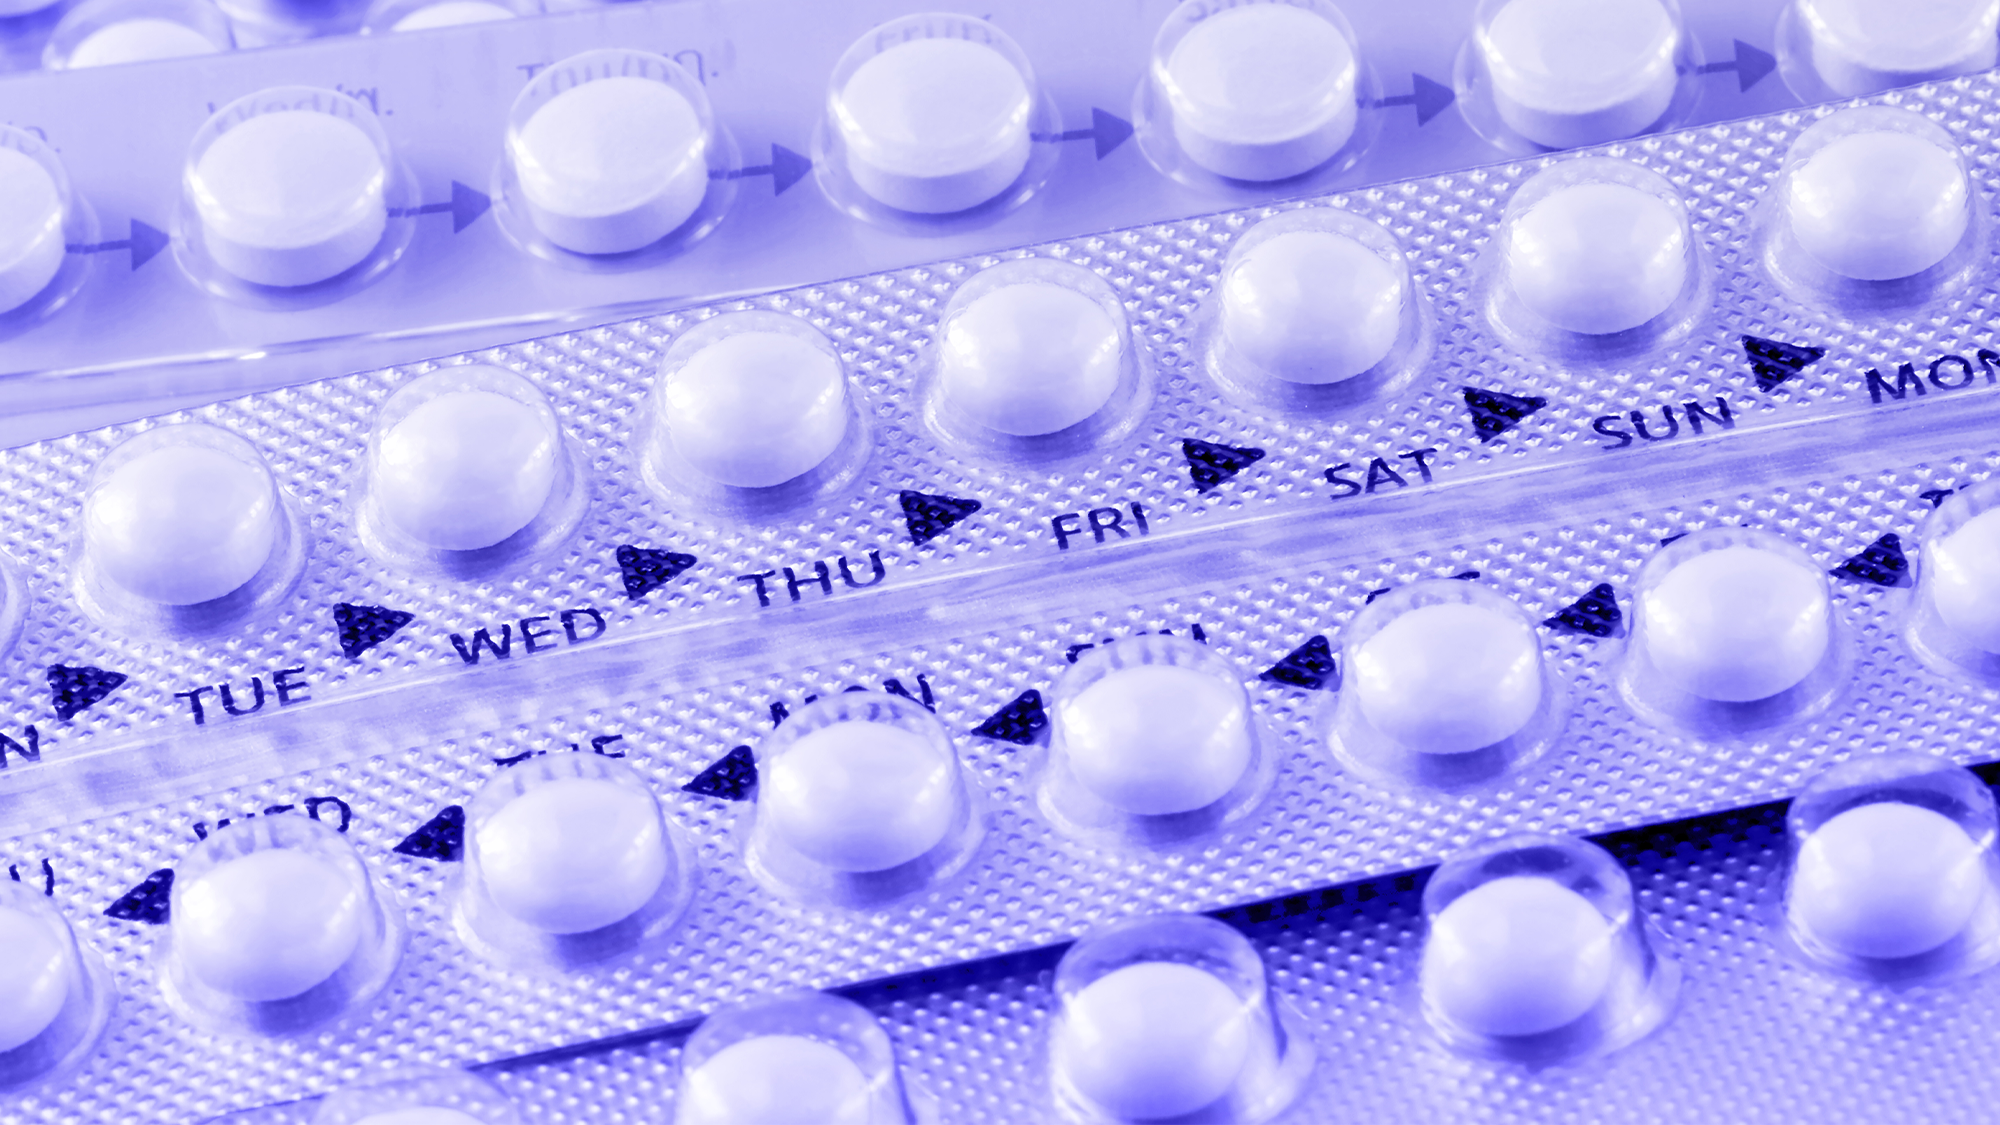 FDA approves first over-the-counter birth control pill in the US